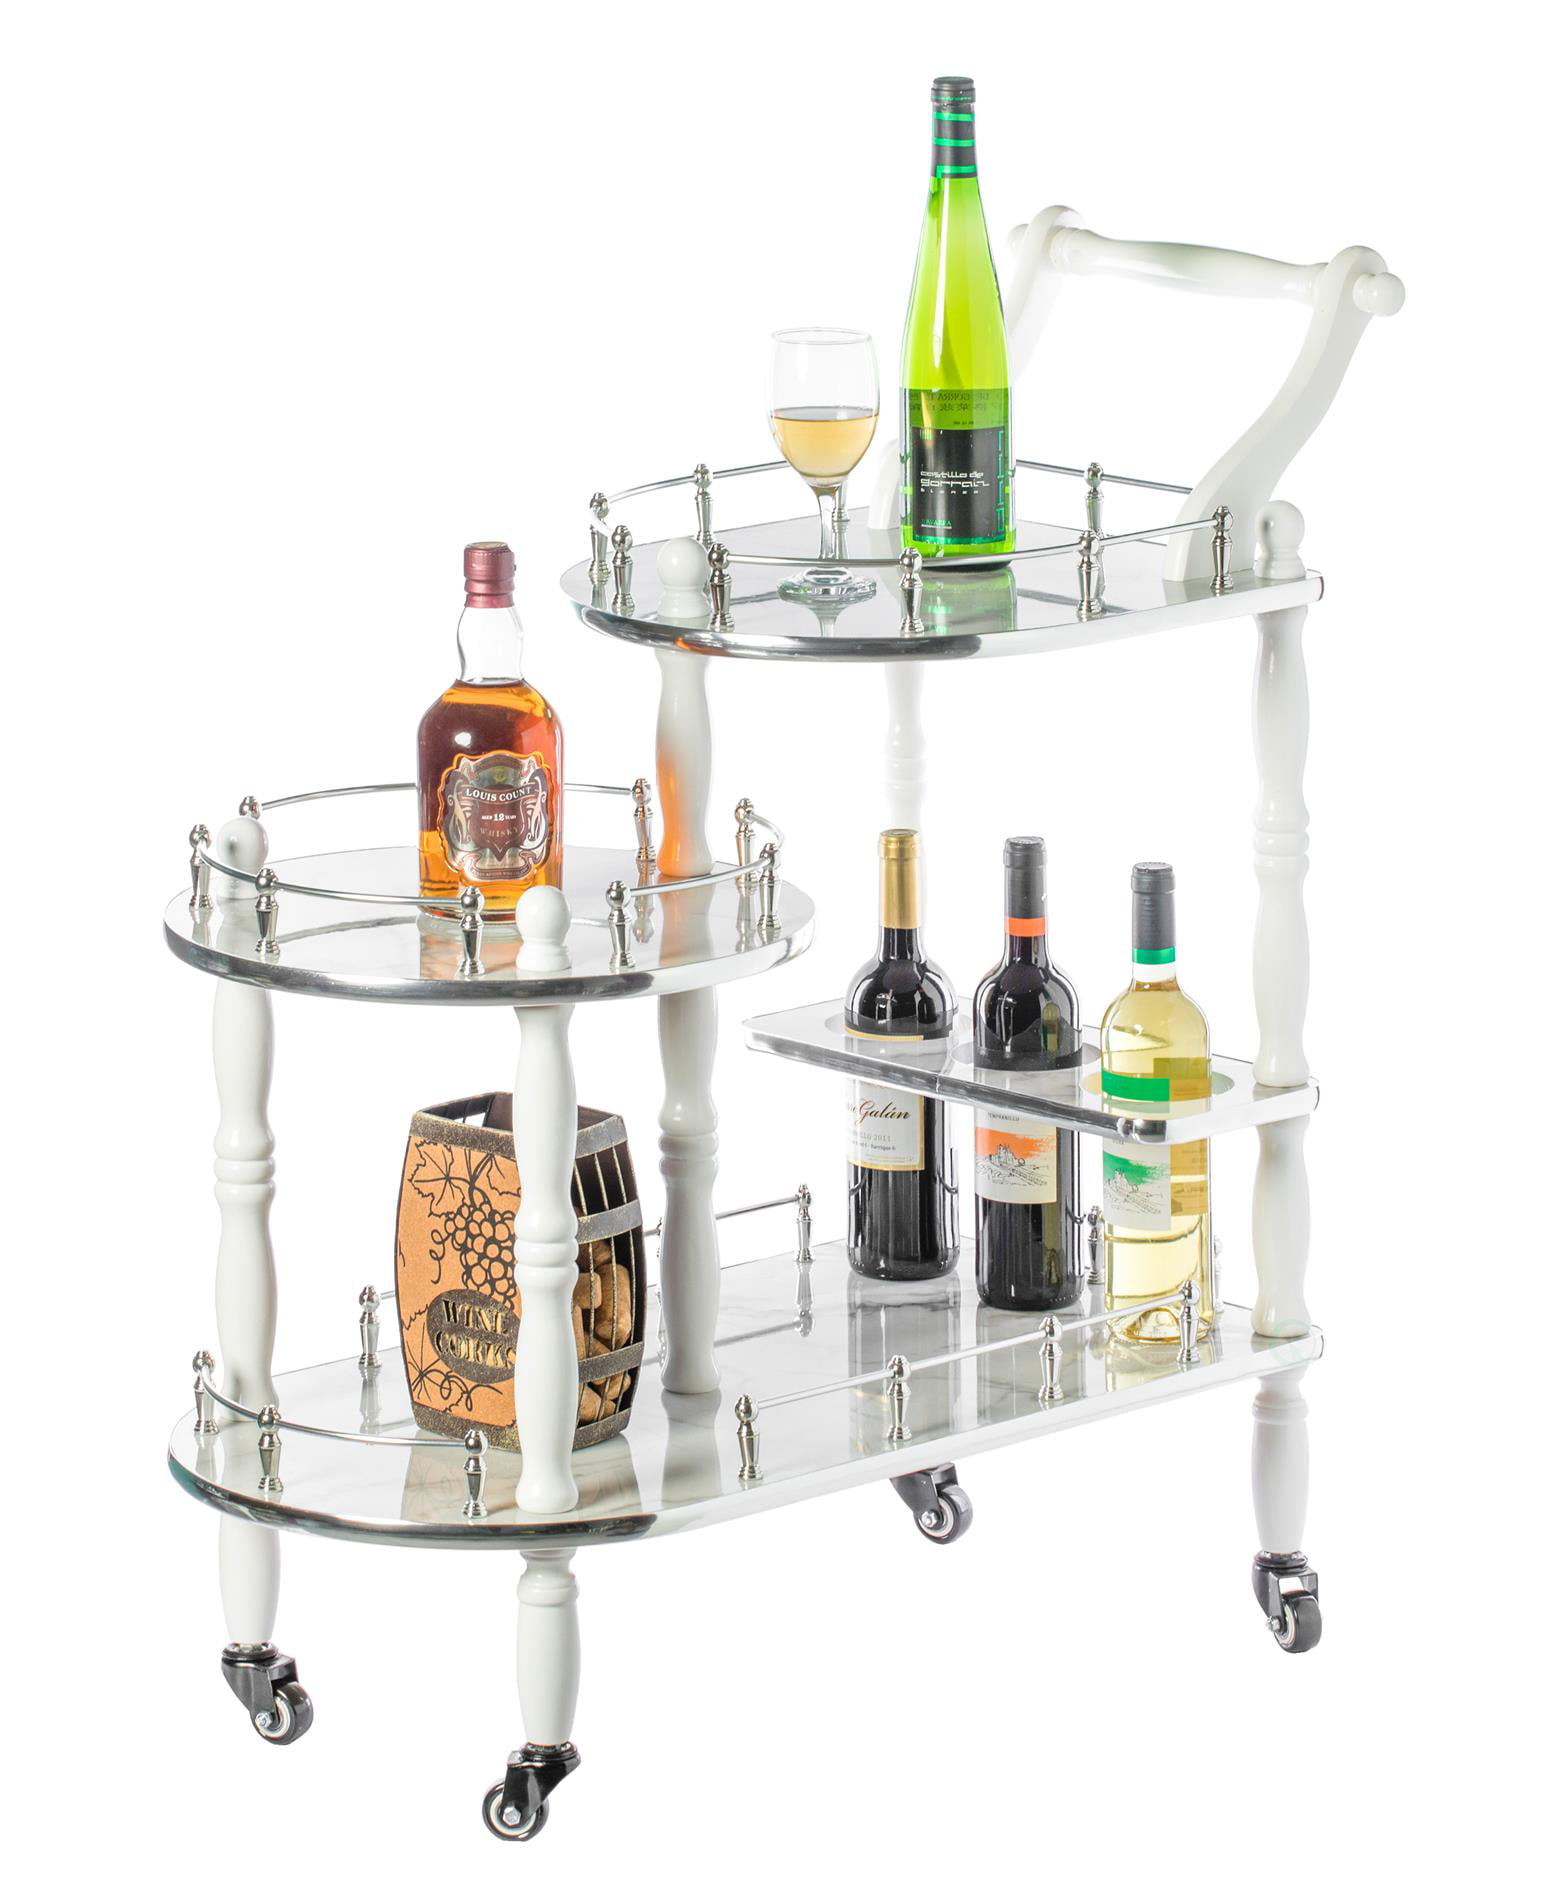 Fabulaxe QI003775.GY 36.5 x 29.5 x 15.75 in. Wood Serving Bar Cart Tea  Trolley with 3 Tier Shelves & Rolling Wheels, Silver, White & Gray